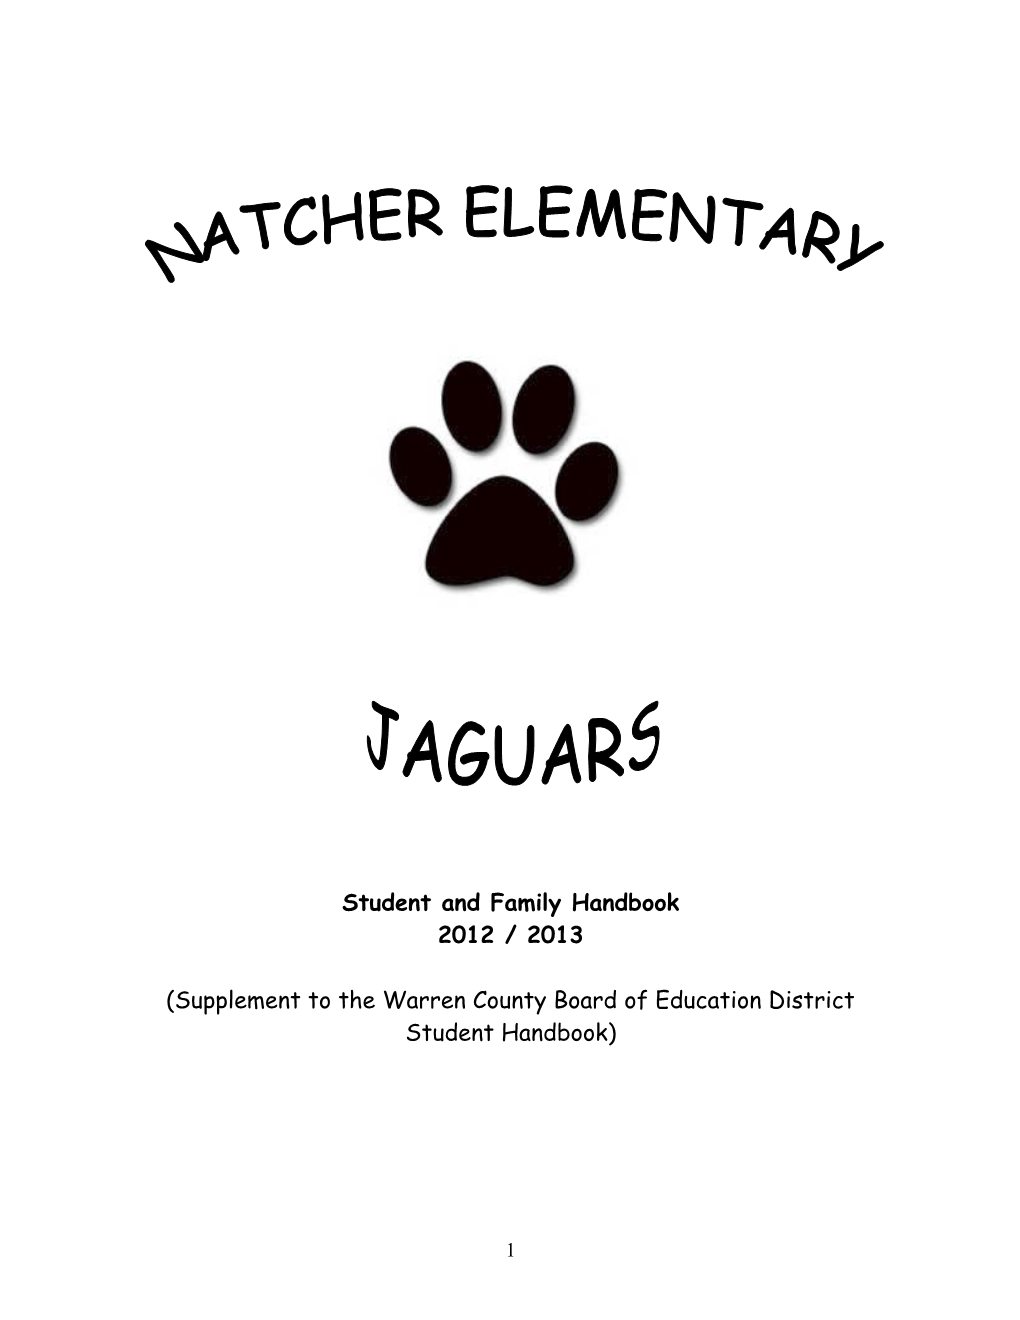 Natcher Elementary at a Glance